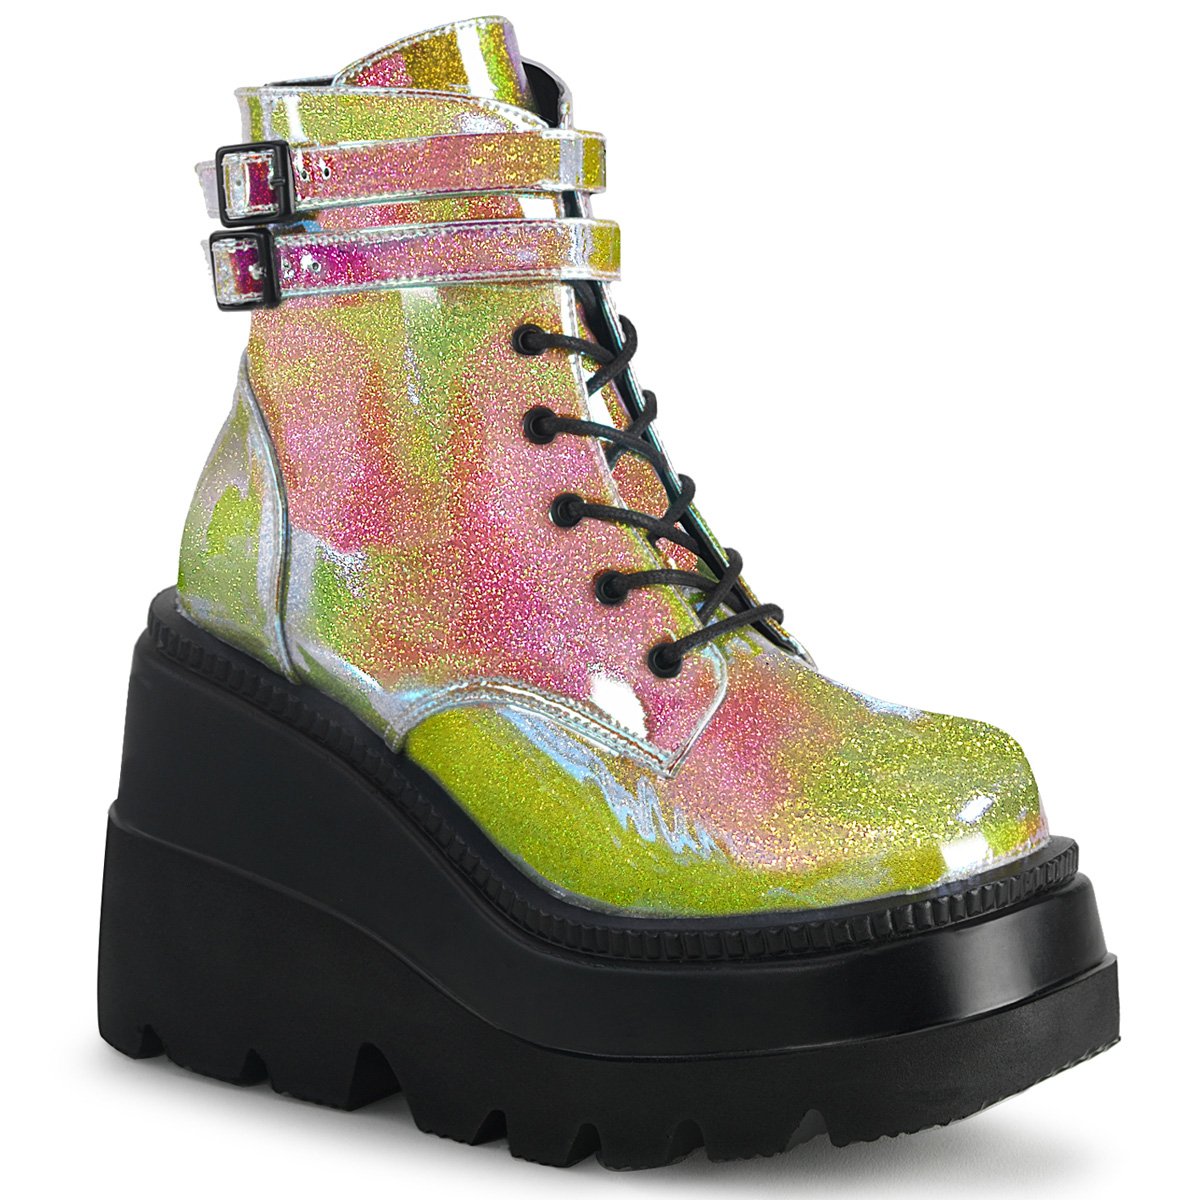 funky boots online